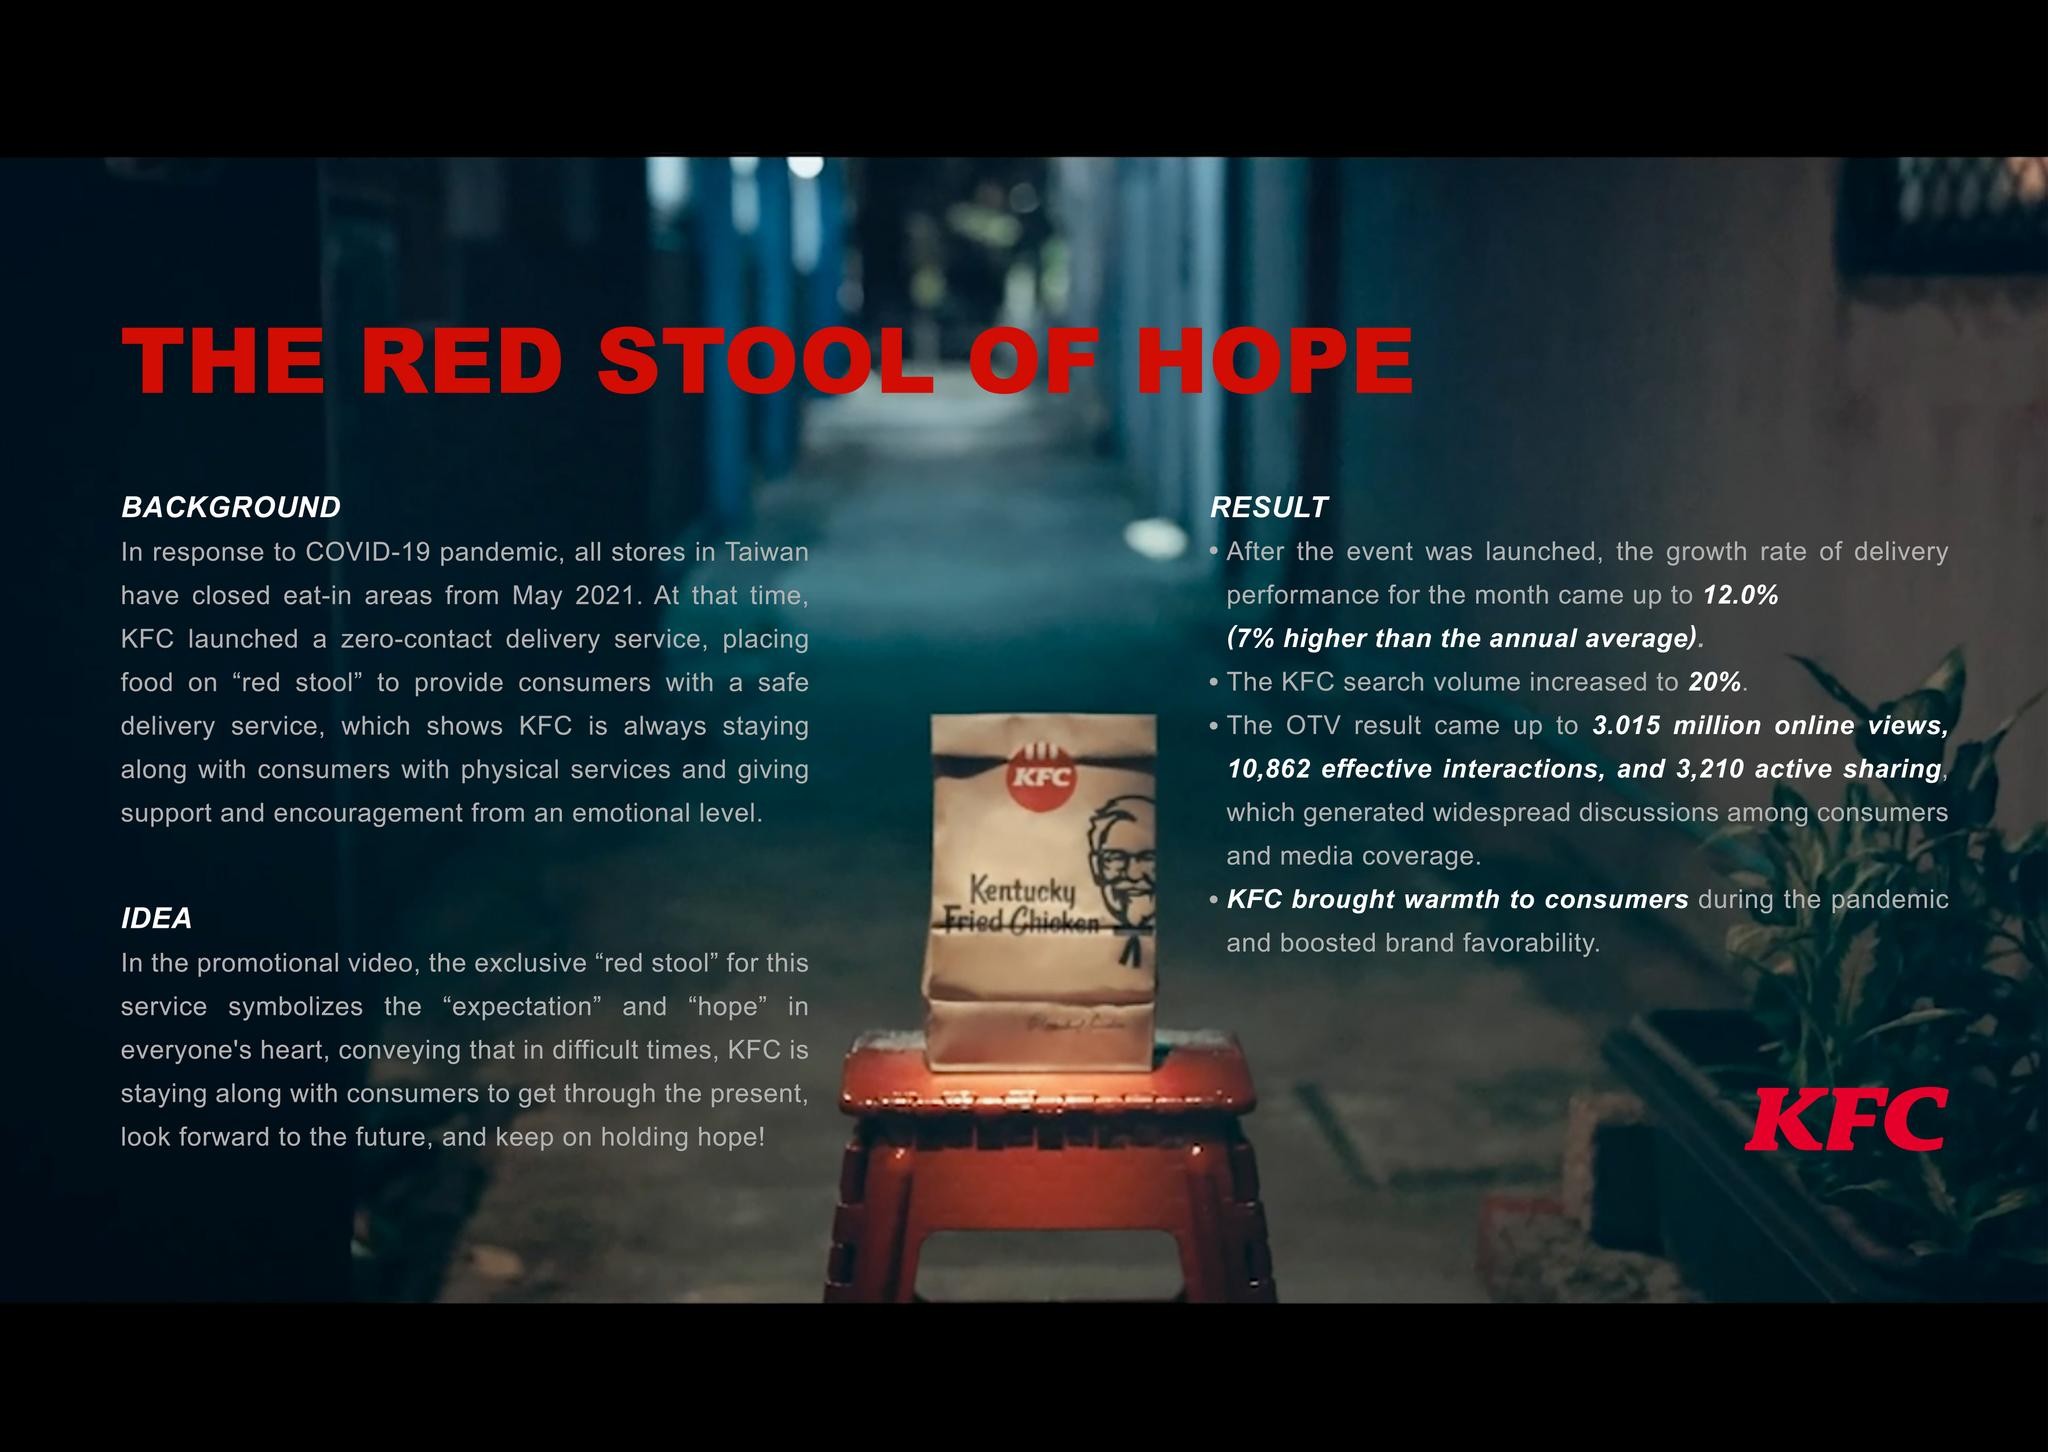 The Red Stool of Hope